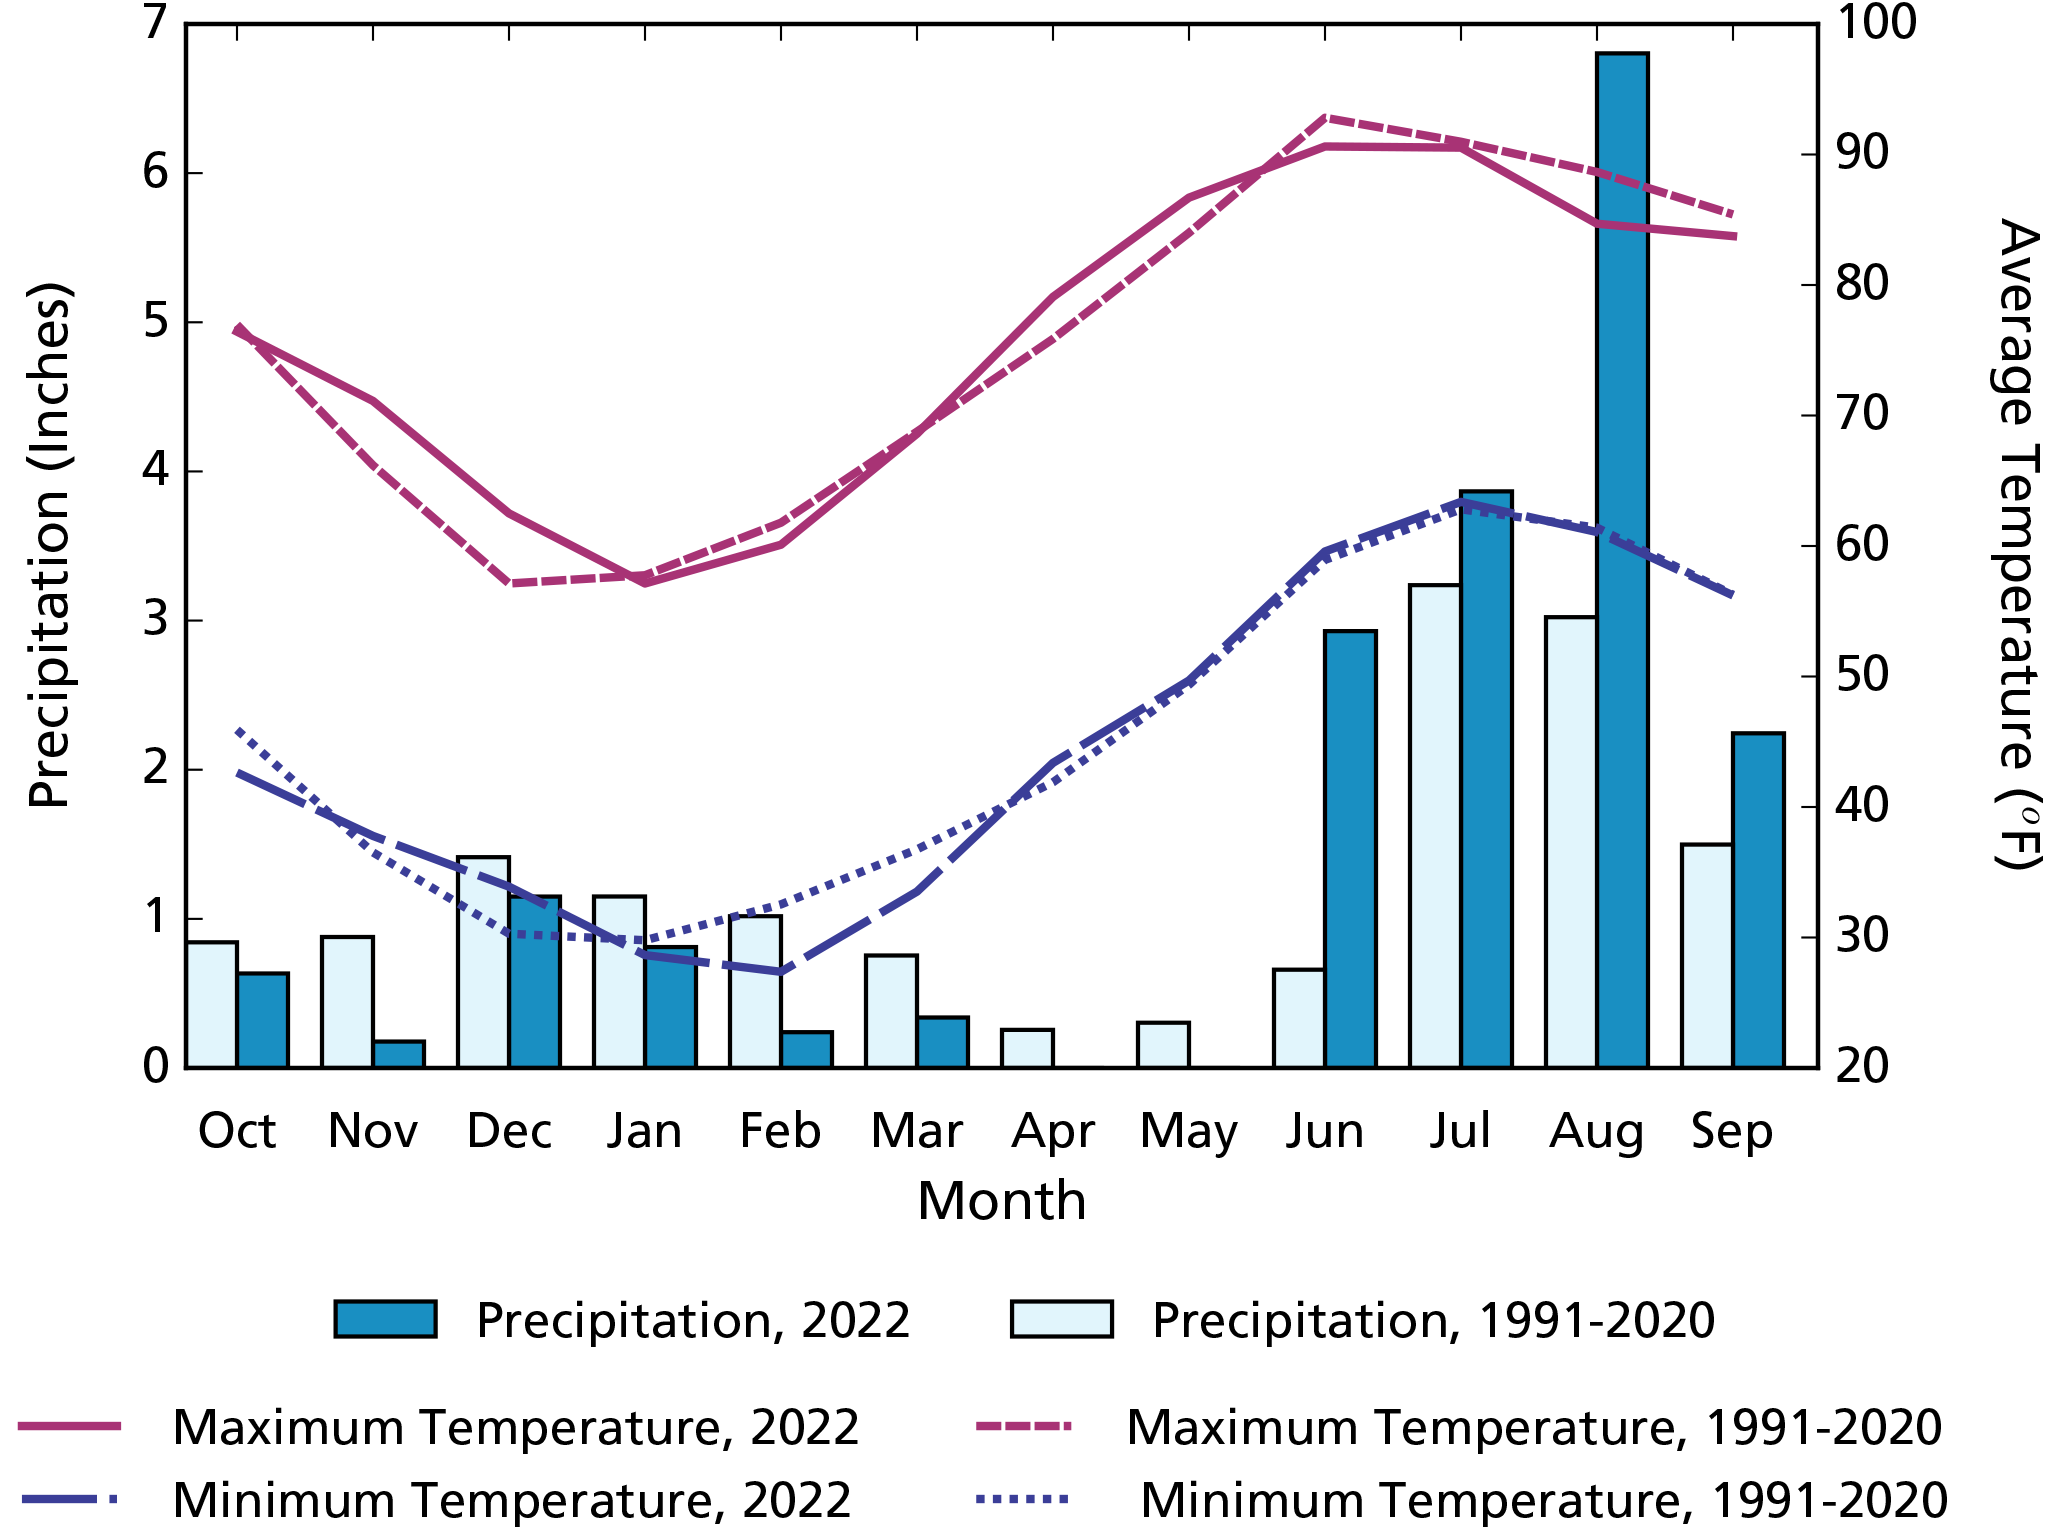 Climogram showing monthly precipitation and air temperature in water year 2022 and 30-year averages. June to September precipitation was greater in water year 2022 than the long-term average for the same months.